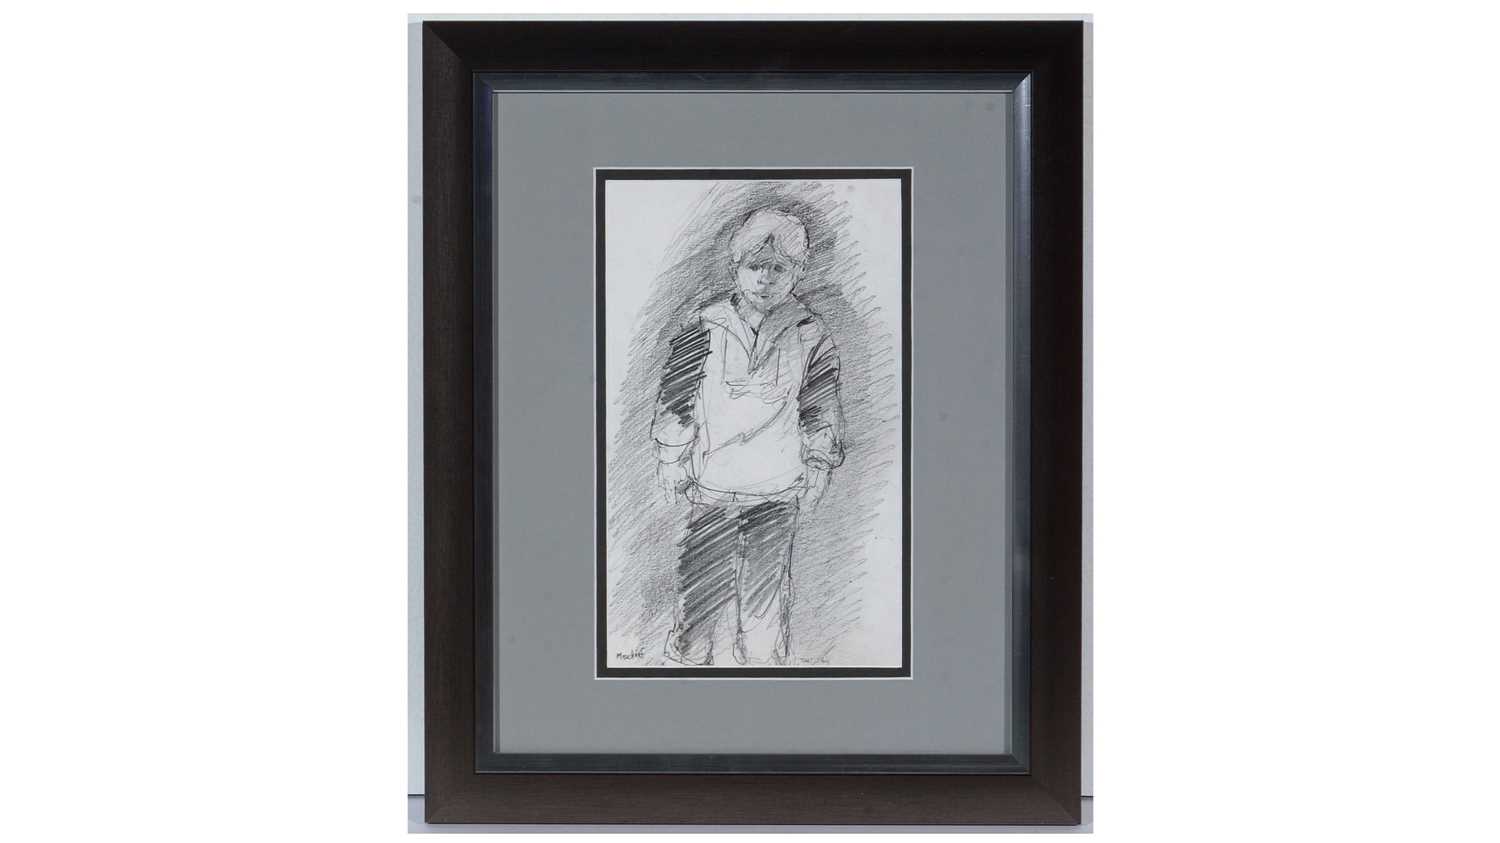 Lot 32 - Tom Dack - Mischief | pencil drawing